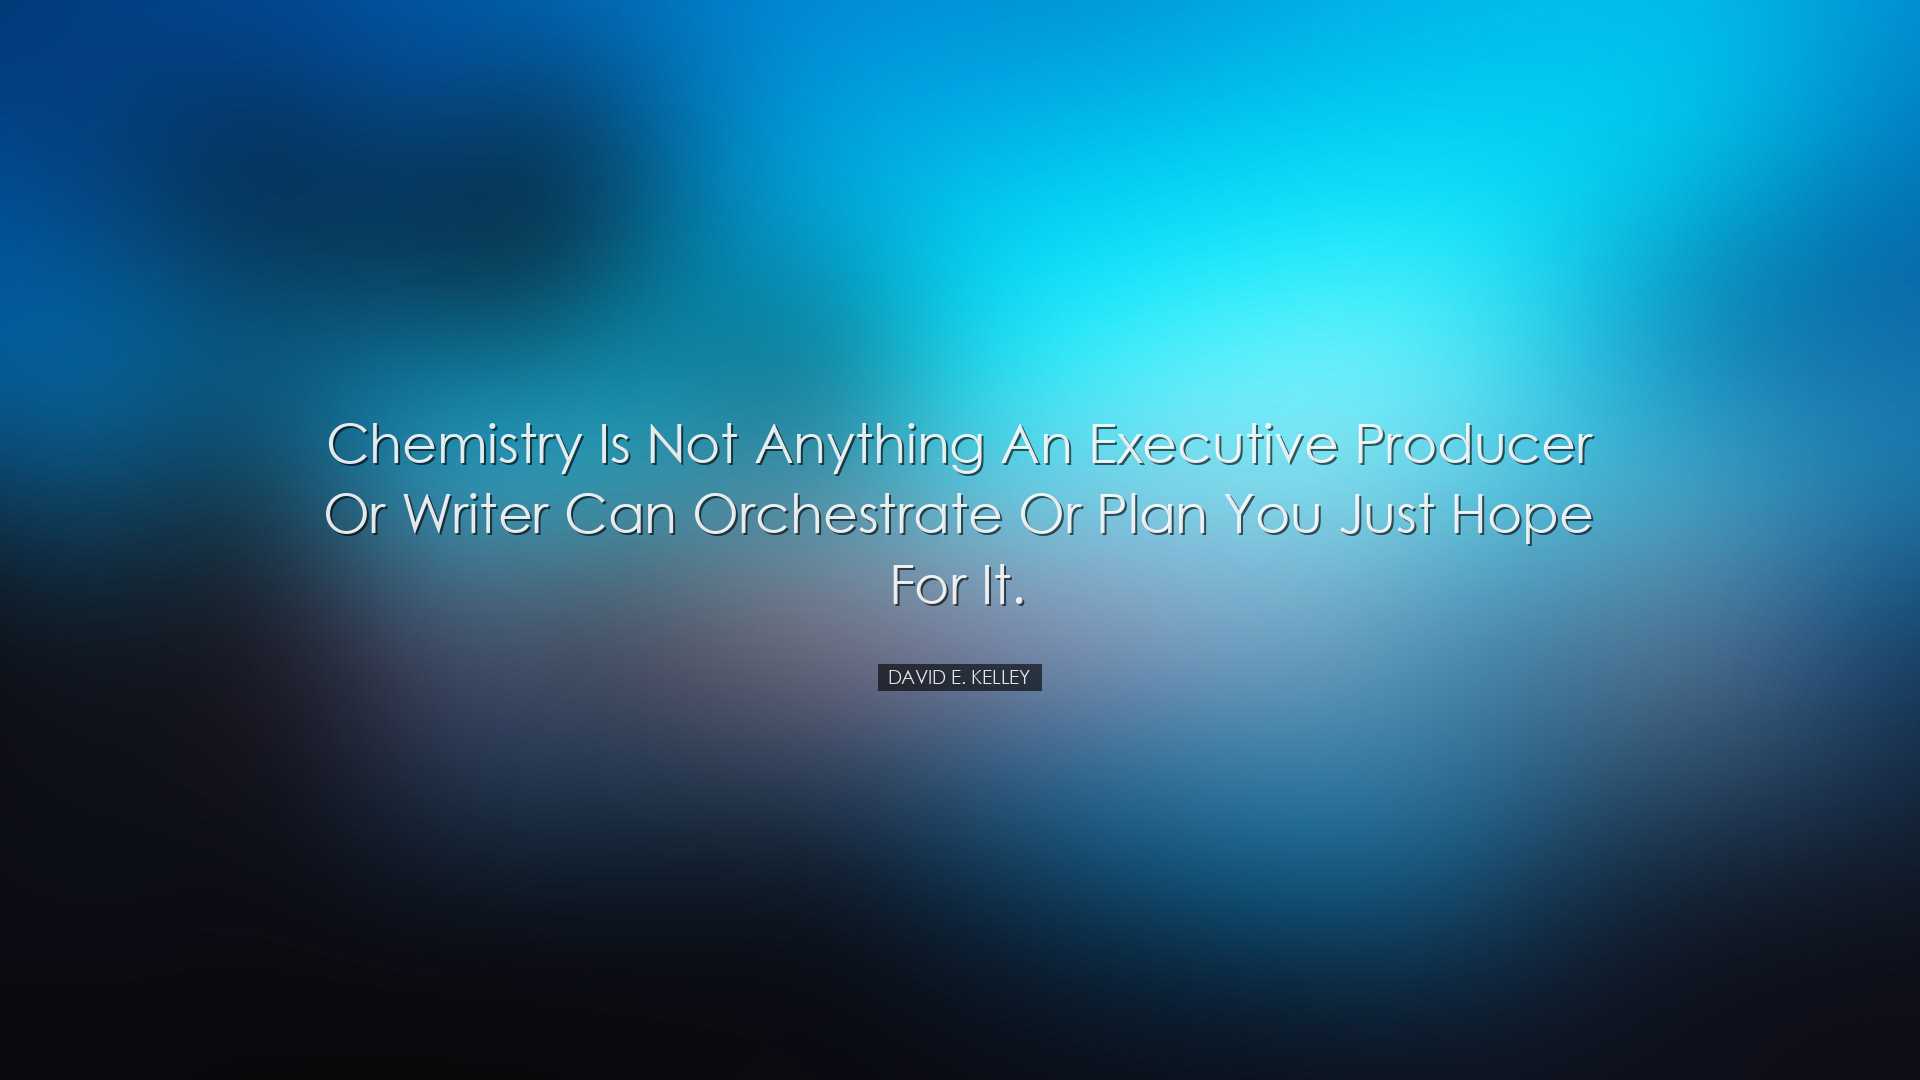 Chemistry is not anything an executive producer or writer can orch